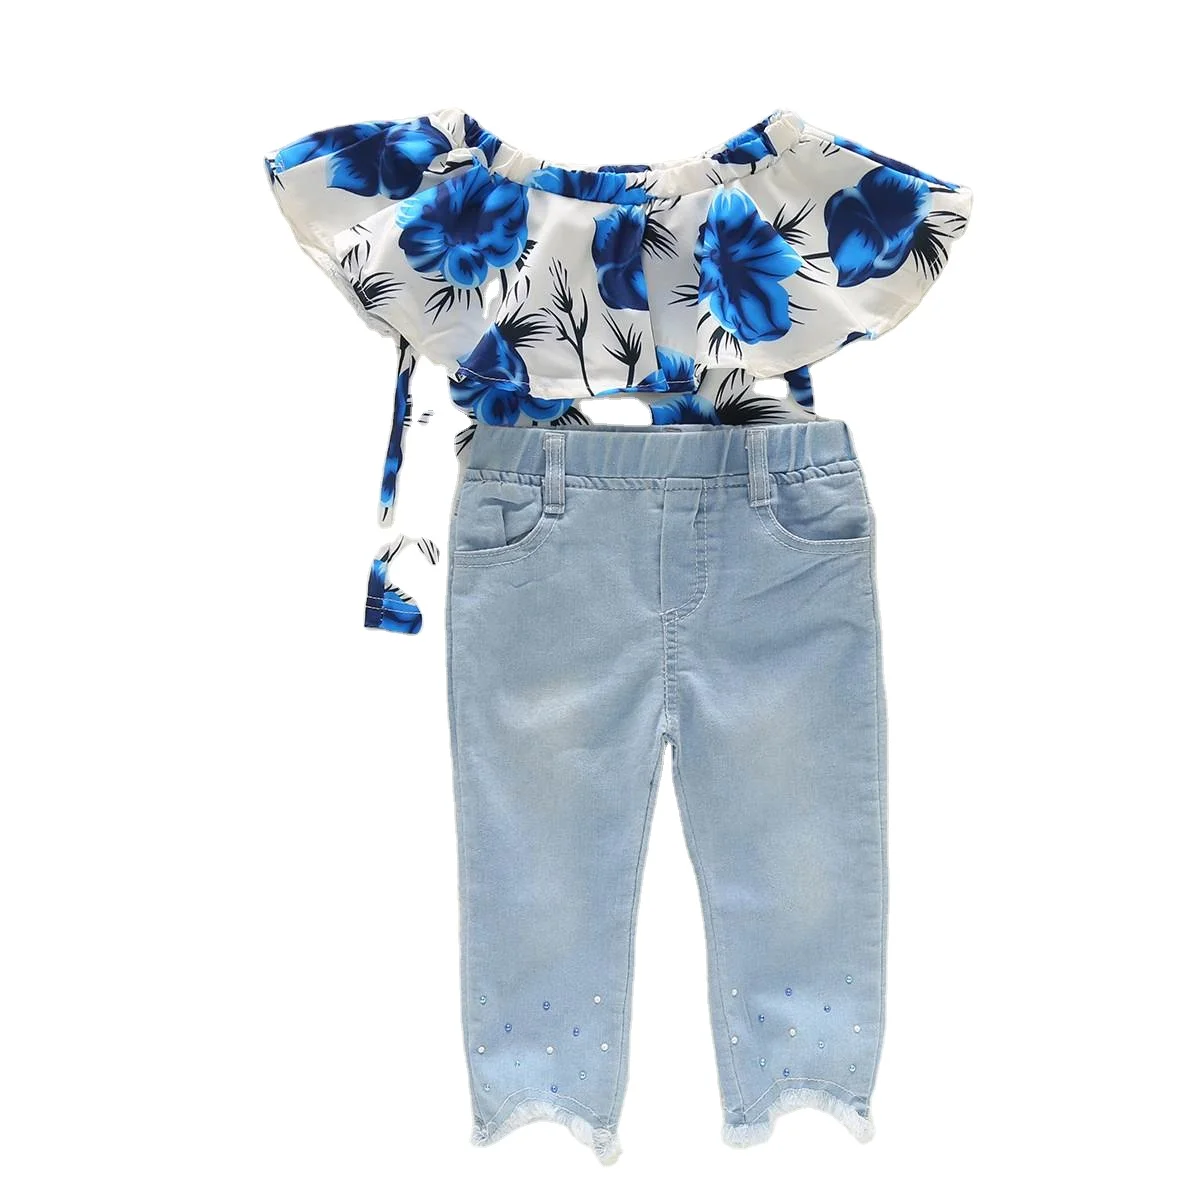 

1265 Summer Toddler Kid Baby Girls Clothes Sets Floral Print Sleeveless Crop Tops+Ripped Denim Pants Jeans 2pcs Outfits Clothing, As picture